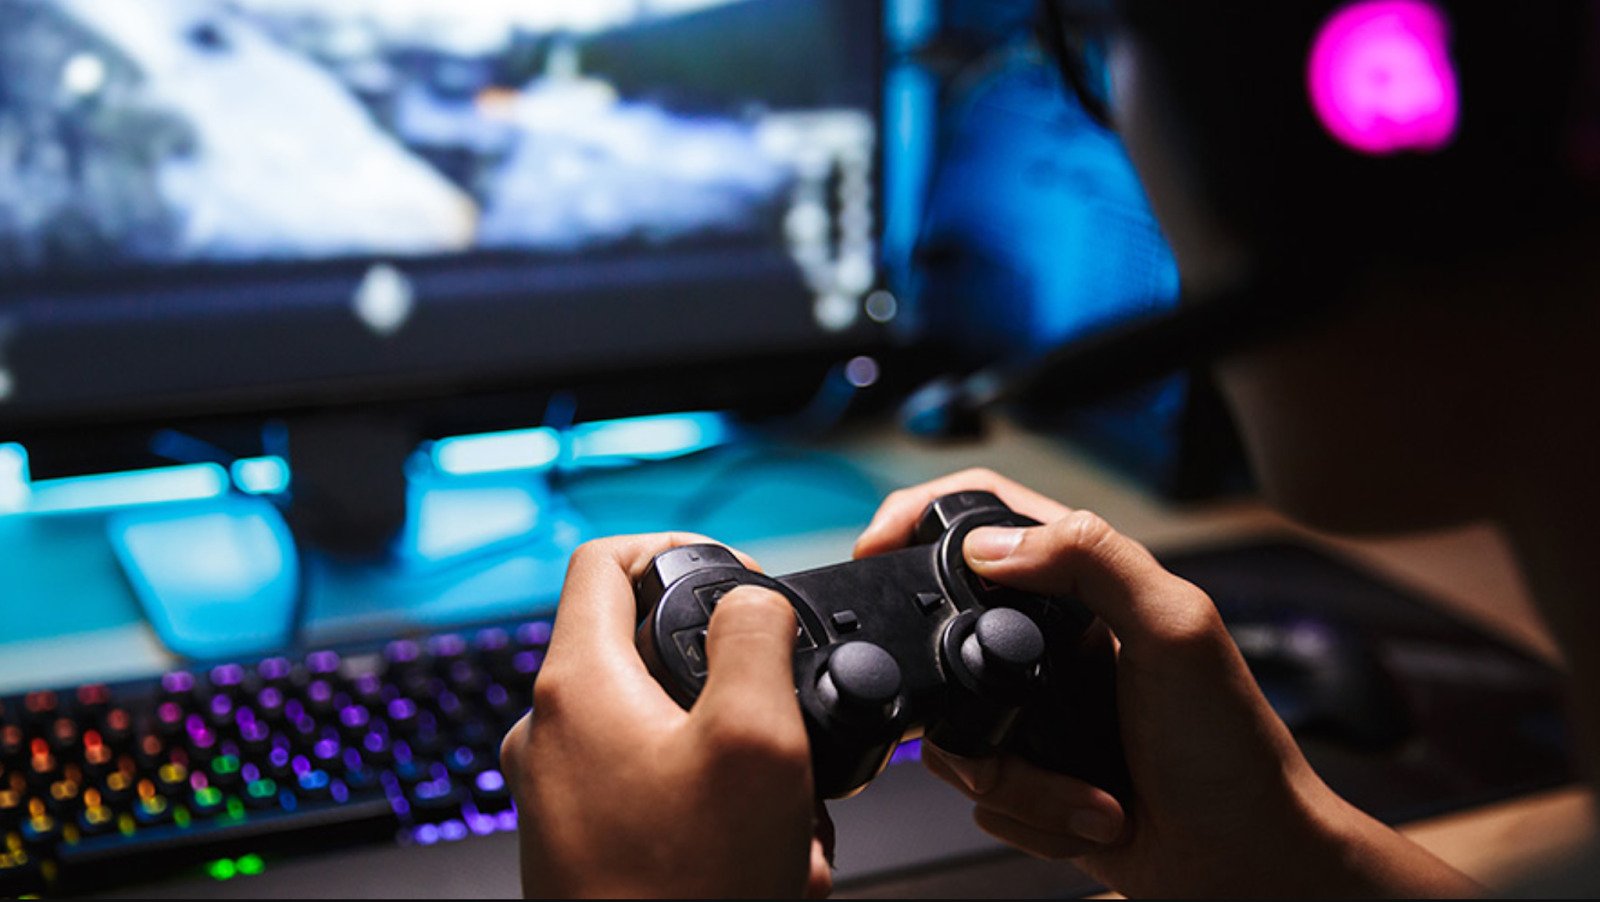 How to Download Highly Compressed PC Games - 2019 Hacks